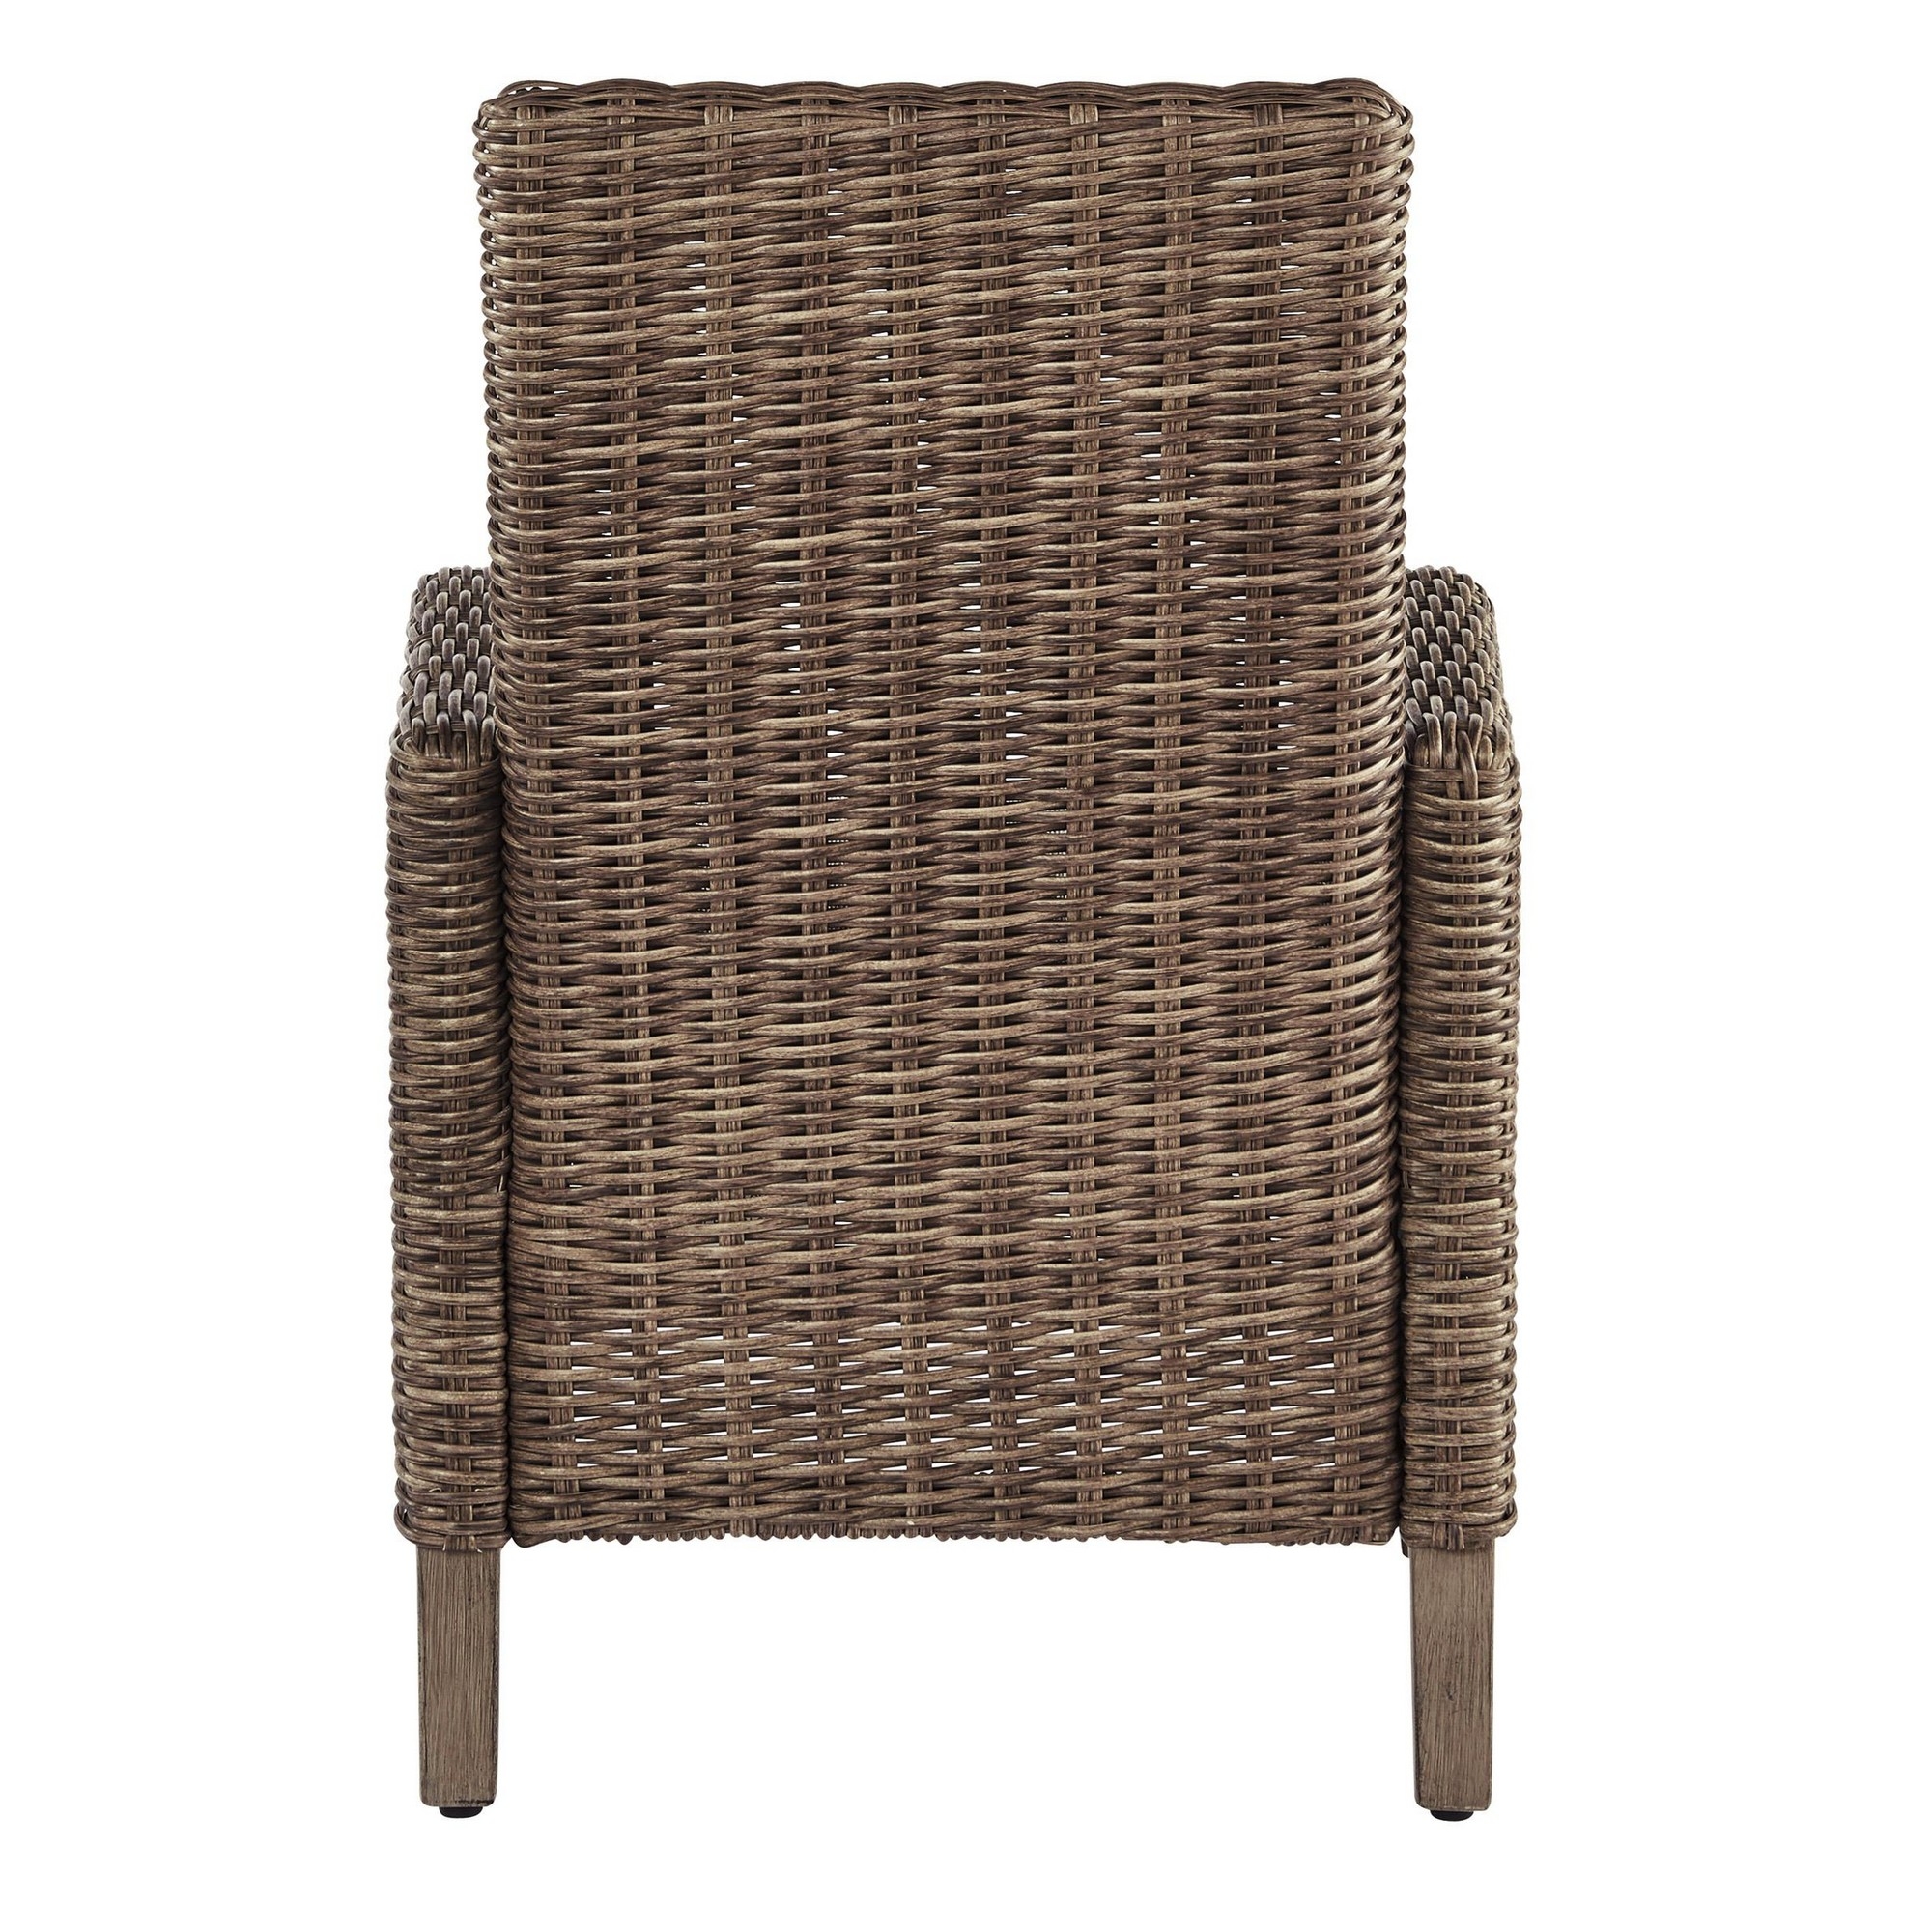 Handwoven Wicker Frame Fabric Upholstered Armchair,Set Of 2,Beige And Brown- Saltoro Sherpi